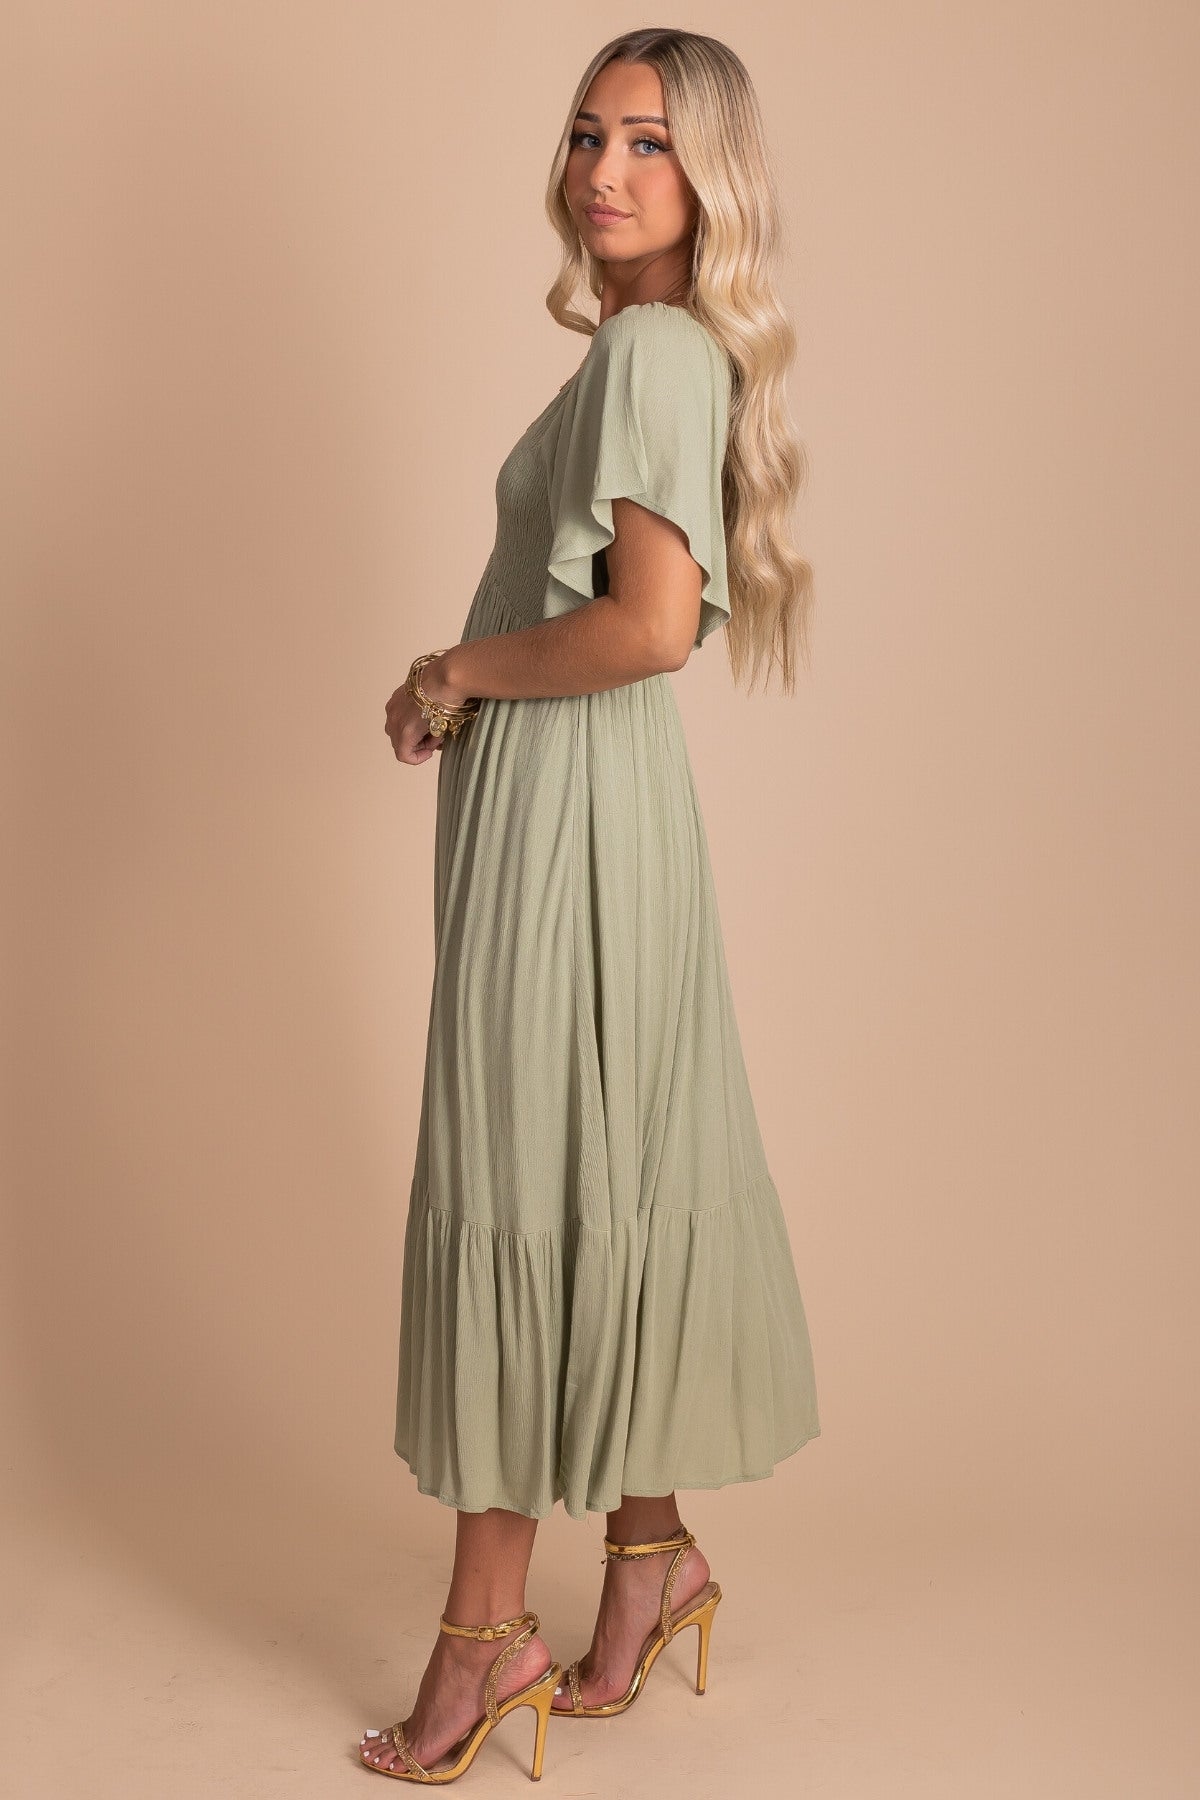 Smocked Midi Dress with Short Sleeves in Green Tea Color